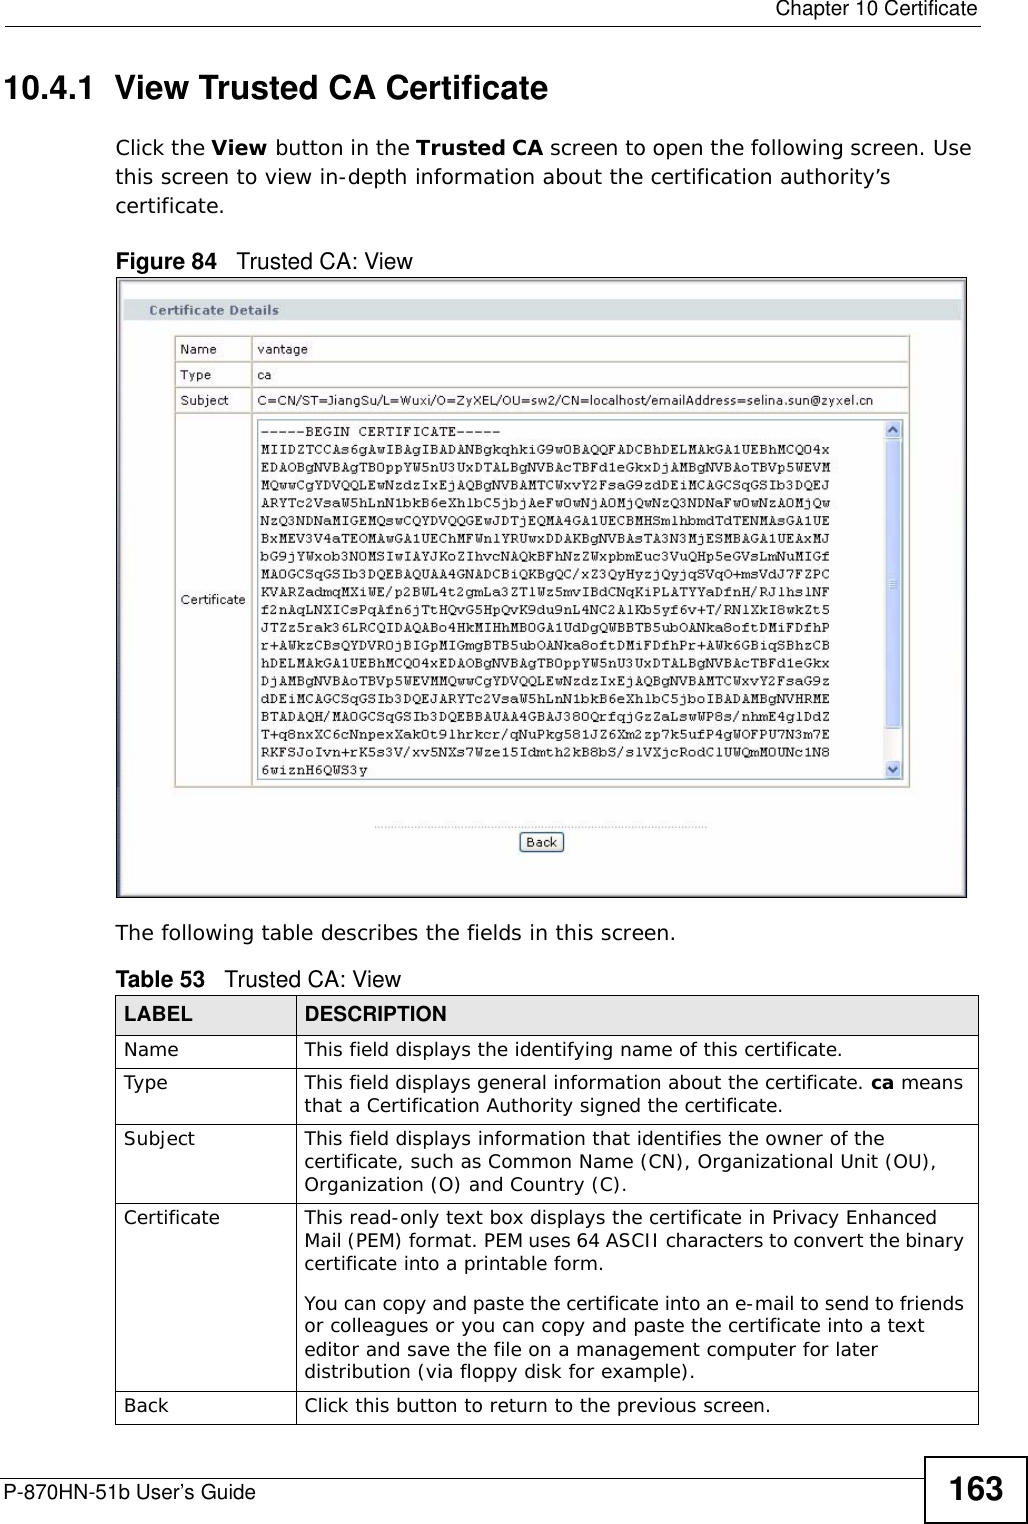  Chapter 10 CertificateP-870HN-51b User’s Guide 16310.4.1  View Trusted CA CertificateClick the View button in the Trusted CA screen to open the following screen. Use this screen to view in-depth information about the certification authority’s certificate.Figure 84   Trusted CA: View The following table describes the fields in this screen. Table 53   Trusted CA: ViewLABEL DESCRIPTIONName This field displays the identifying name of this certificate. Type This field displays general information about the certificate. ca means that a Certification Authority signed the certificate. Subject This field displays information that identifies the owner of the certificate, such as Common Name (CN), Organizational Unit (OU), Organization (O) and Country (C).Certificate This read-only text box displays the certificate in Privacy Enhanced Mail (PEM) format. PEM uses 64 ASCII characters to convert the binary certificate into a printable form. You can copy and paste the certificate into an e-mail to send to friends or colleagues or you can copy and paste the certificate into a text editor and save the file on a management computer for later distribution (via floppy disk for example).Back Click this button to return to the previous screen.